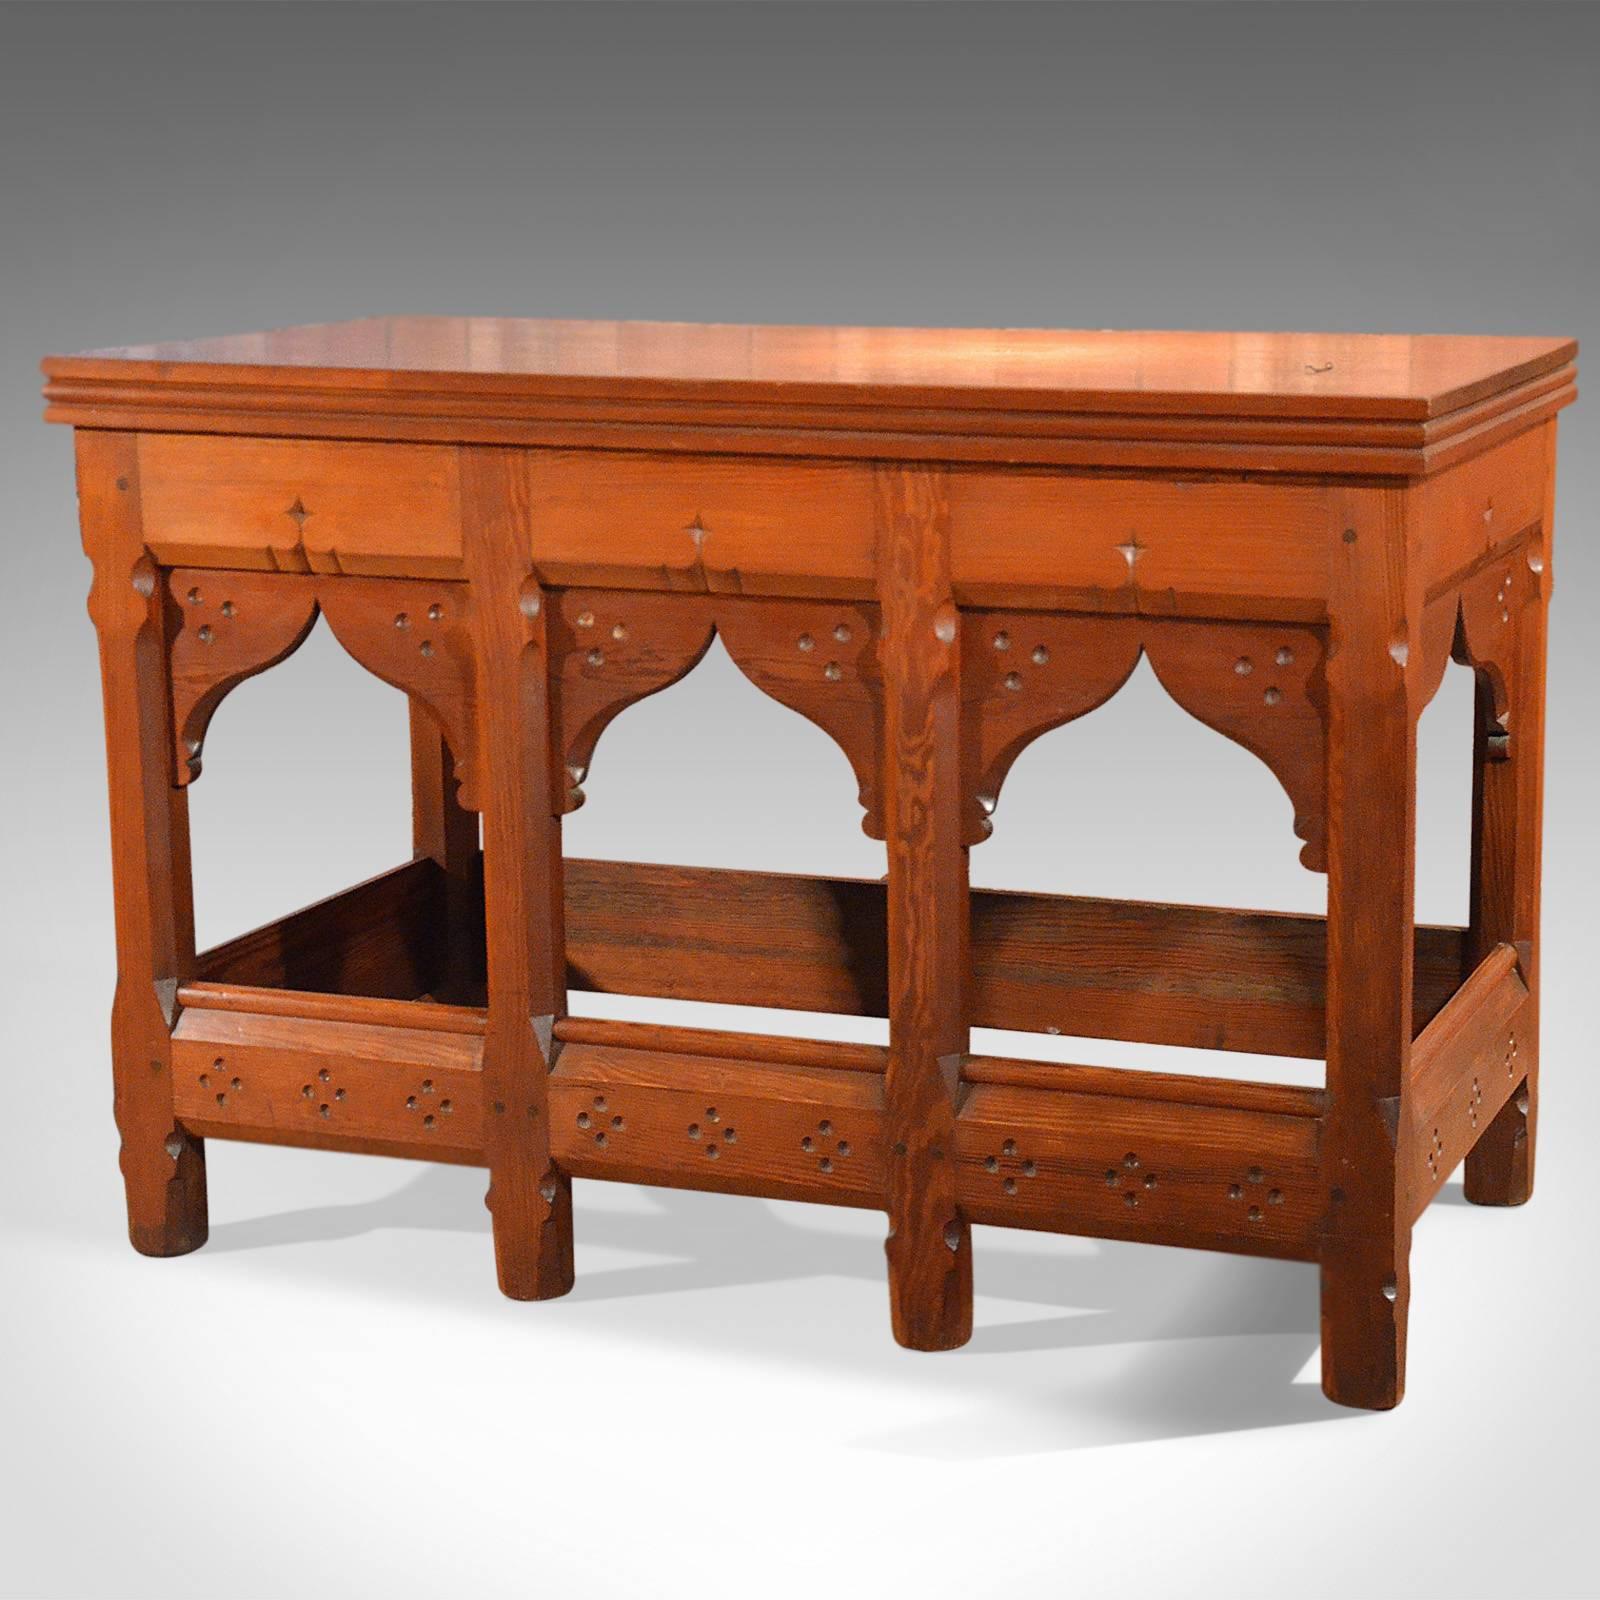 Pine Arts and Crafts Antique Serving Table, circa 1880